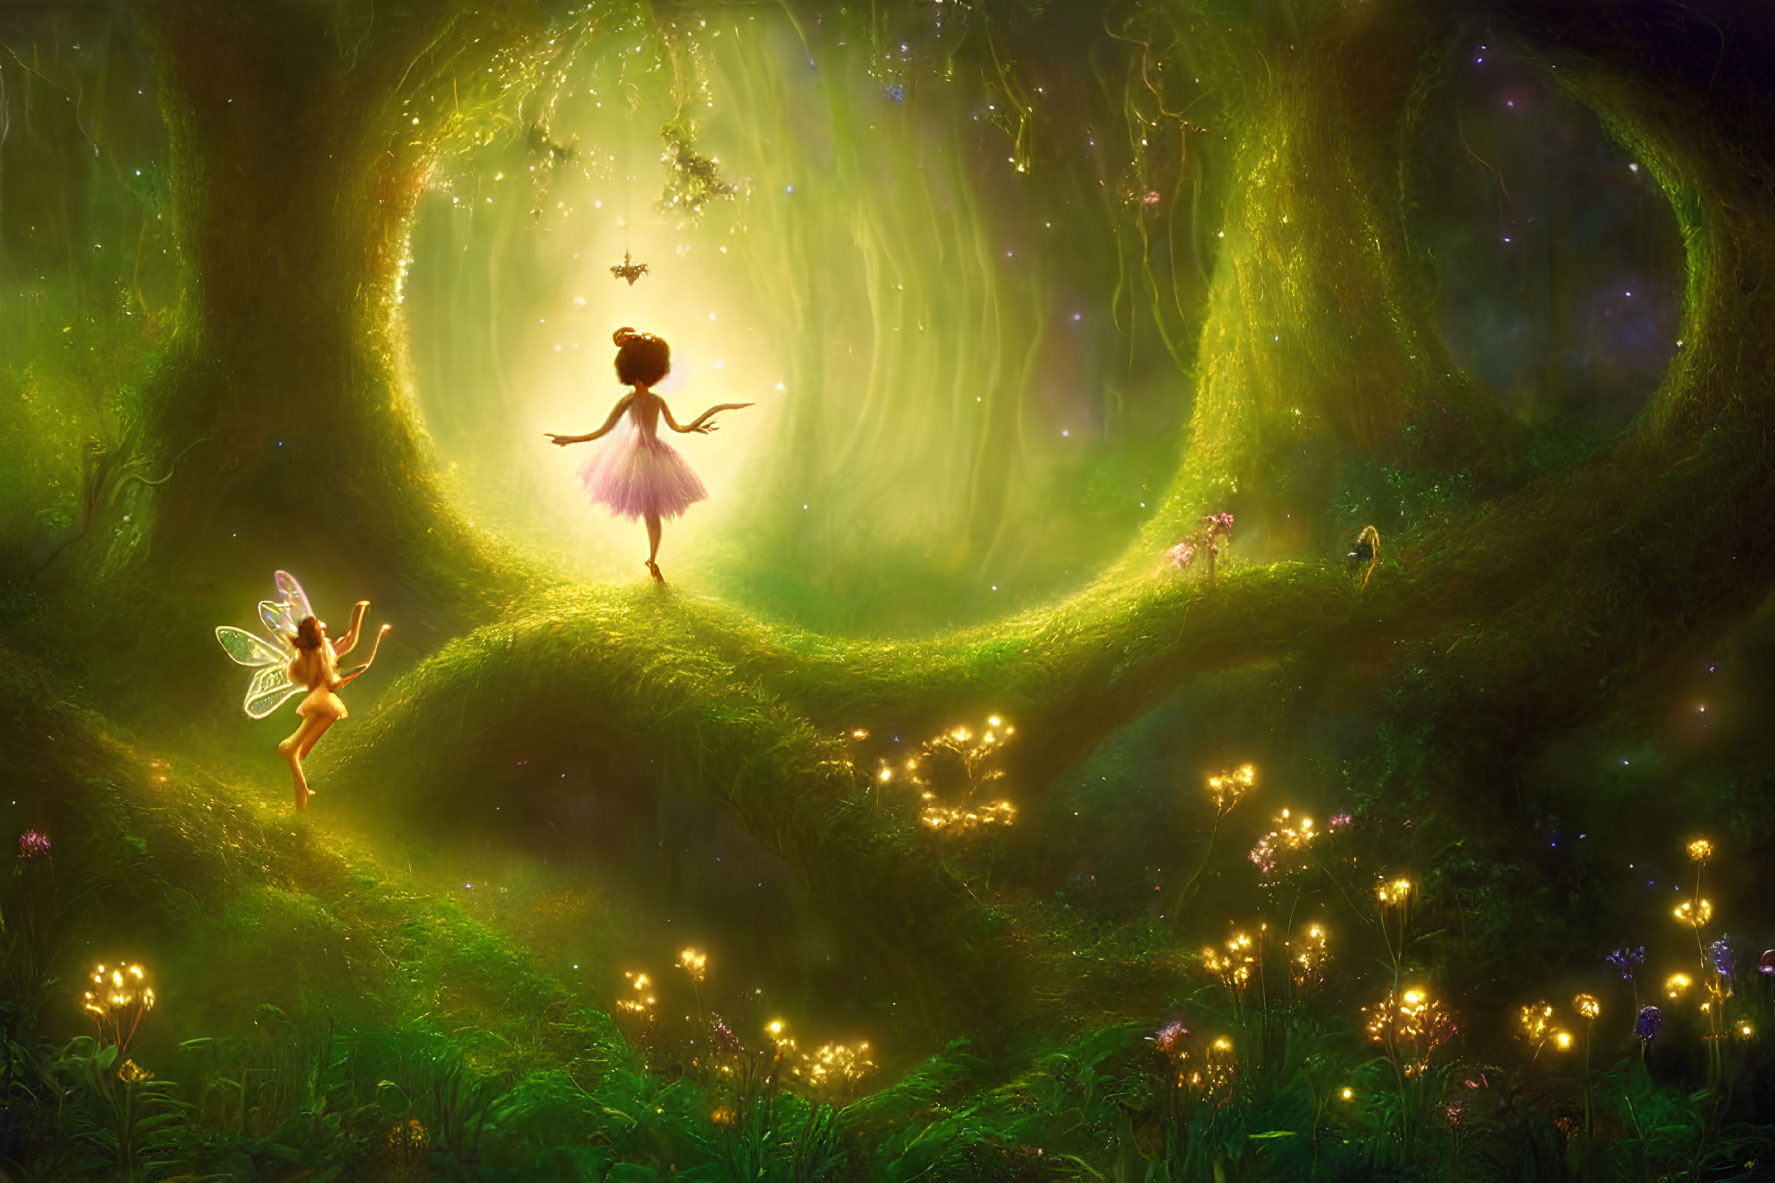 Magical forest scene with two delicate winged fairies